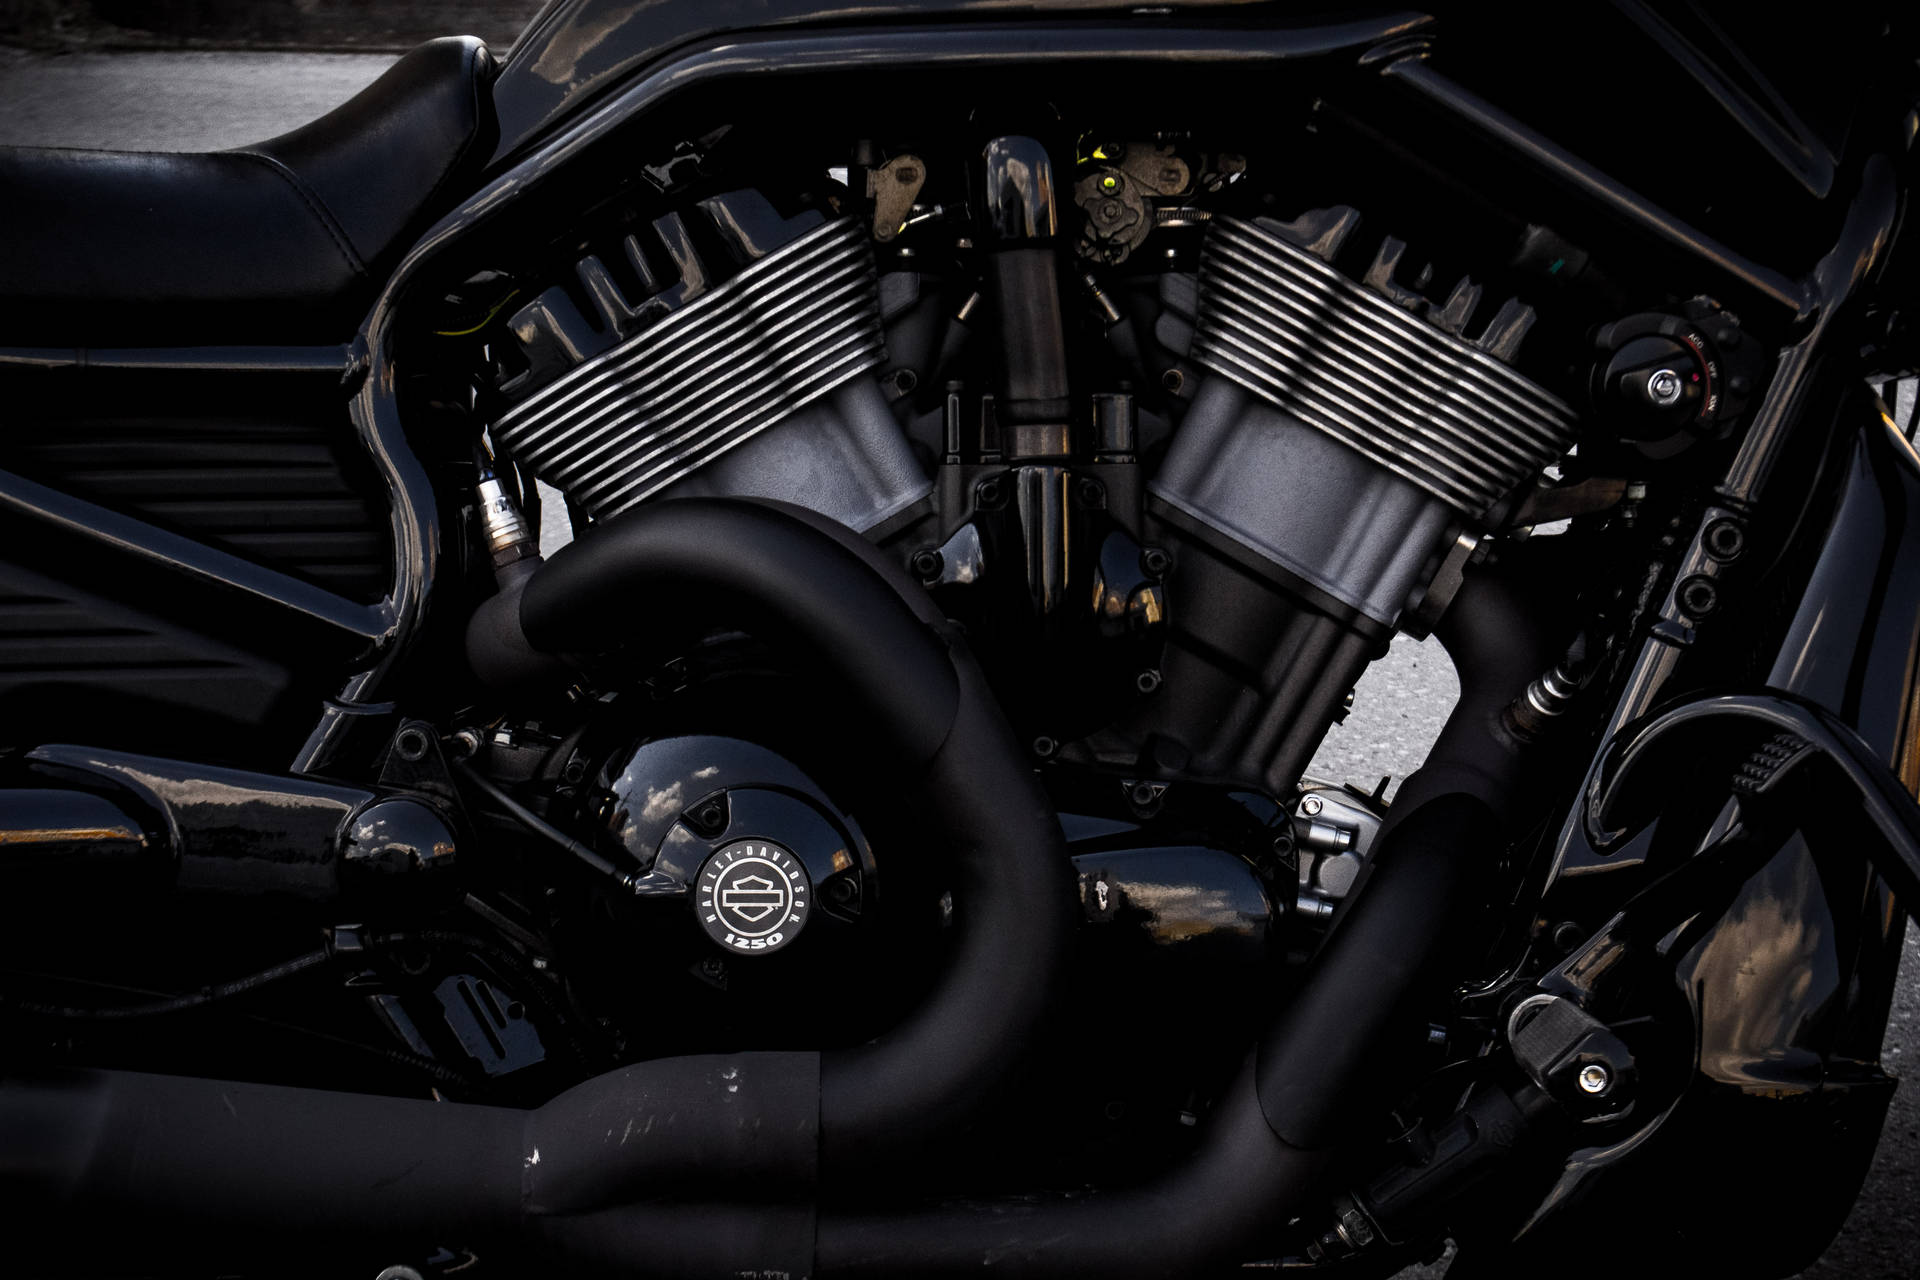 Power Up Your World With A Sleek, Black And Gray Motorcycle Engine. Background